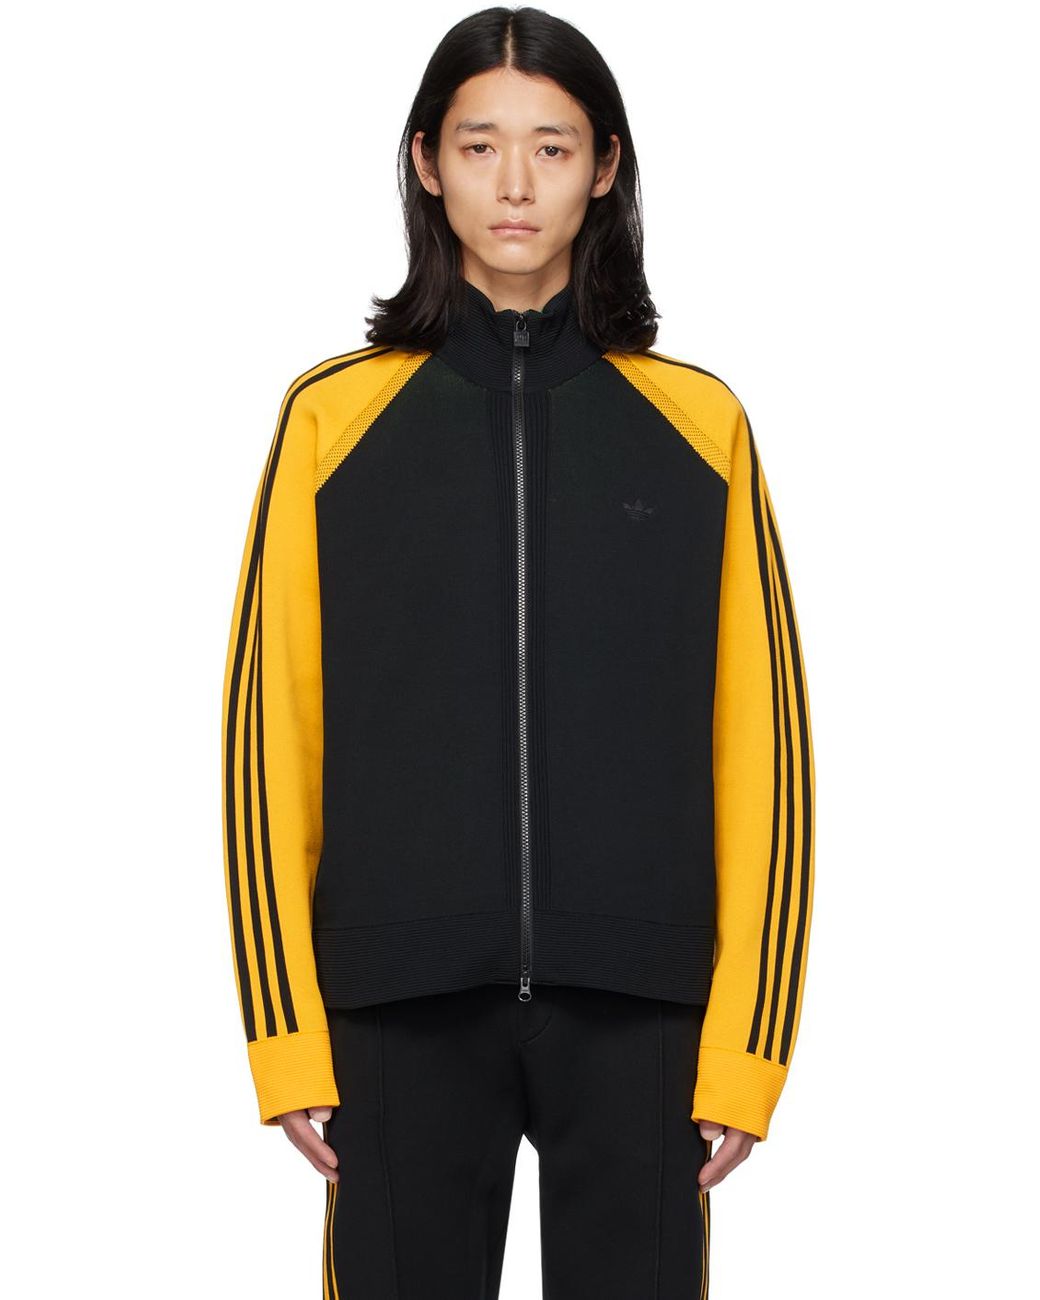 Wales Bonner & Yellow Adidas Originals Edition Track Jacket in Blue for Men  | Lyst Canada